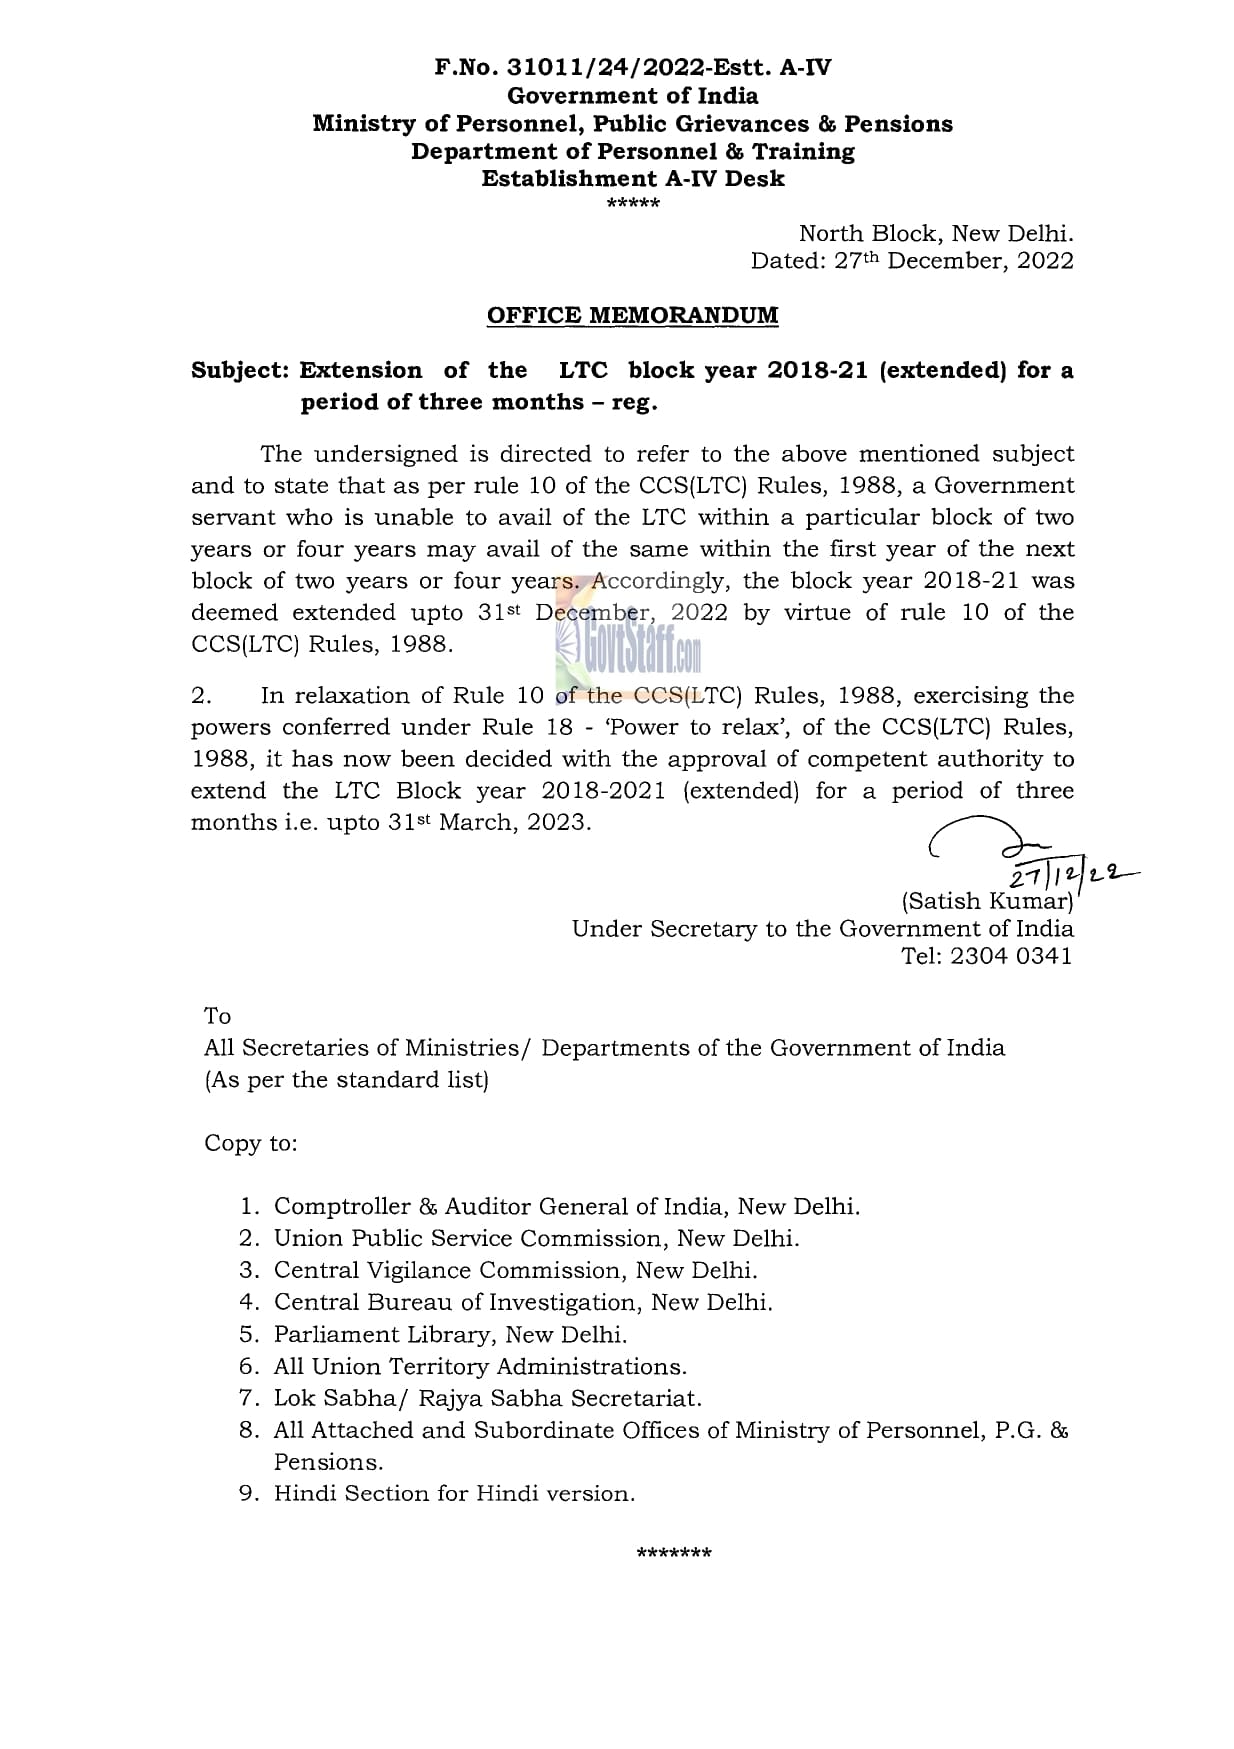 Extension of the LTC block year 2018-21 (extended) upto 31st March, 2023: DoPT OM dated 27.12.2022